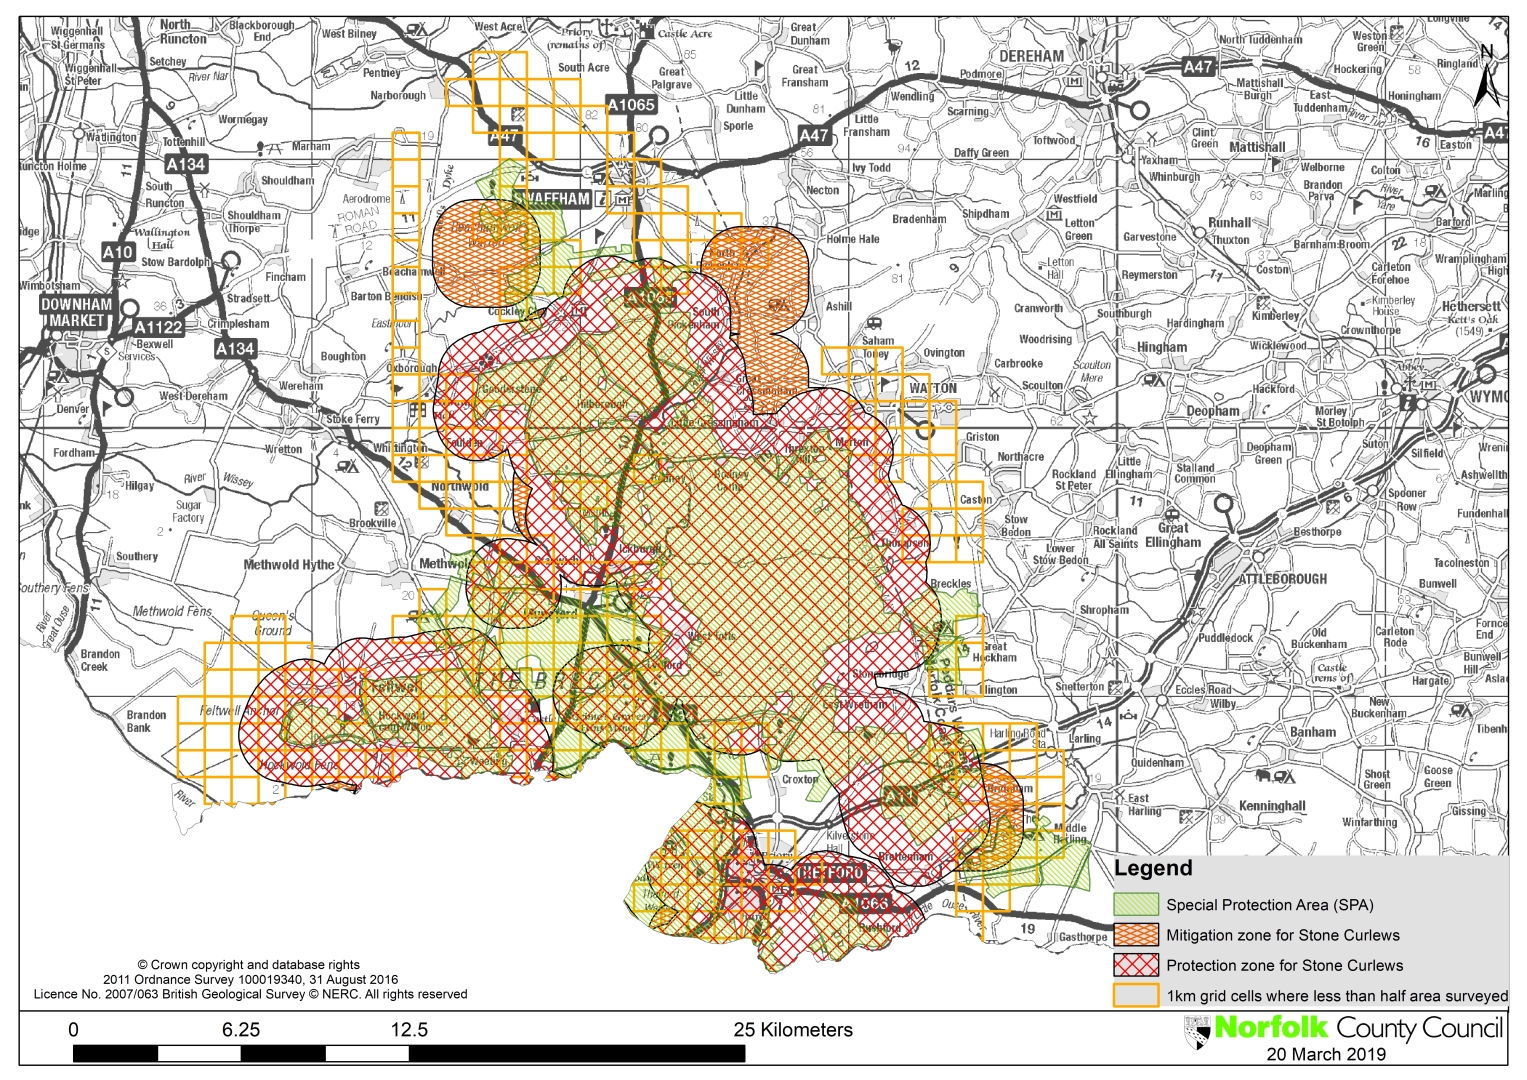 Stone Curlew mitigation zones and protection zones